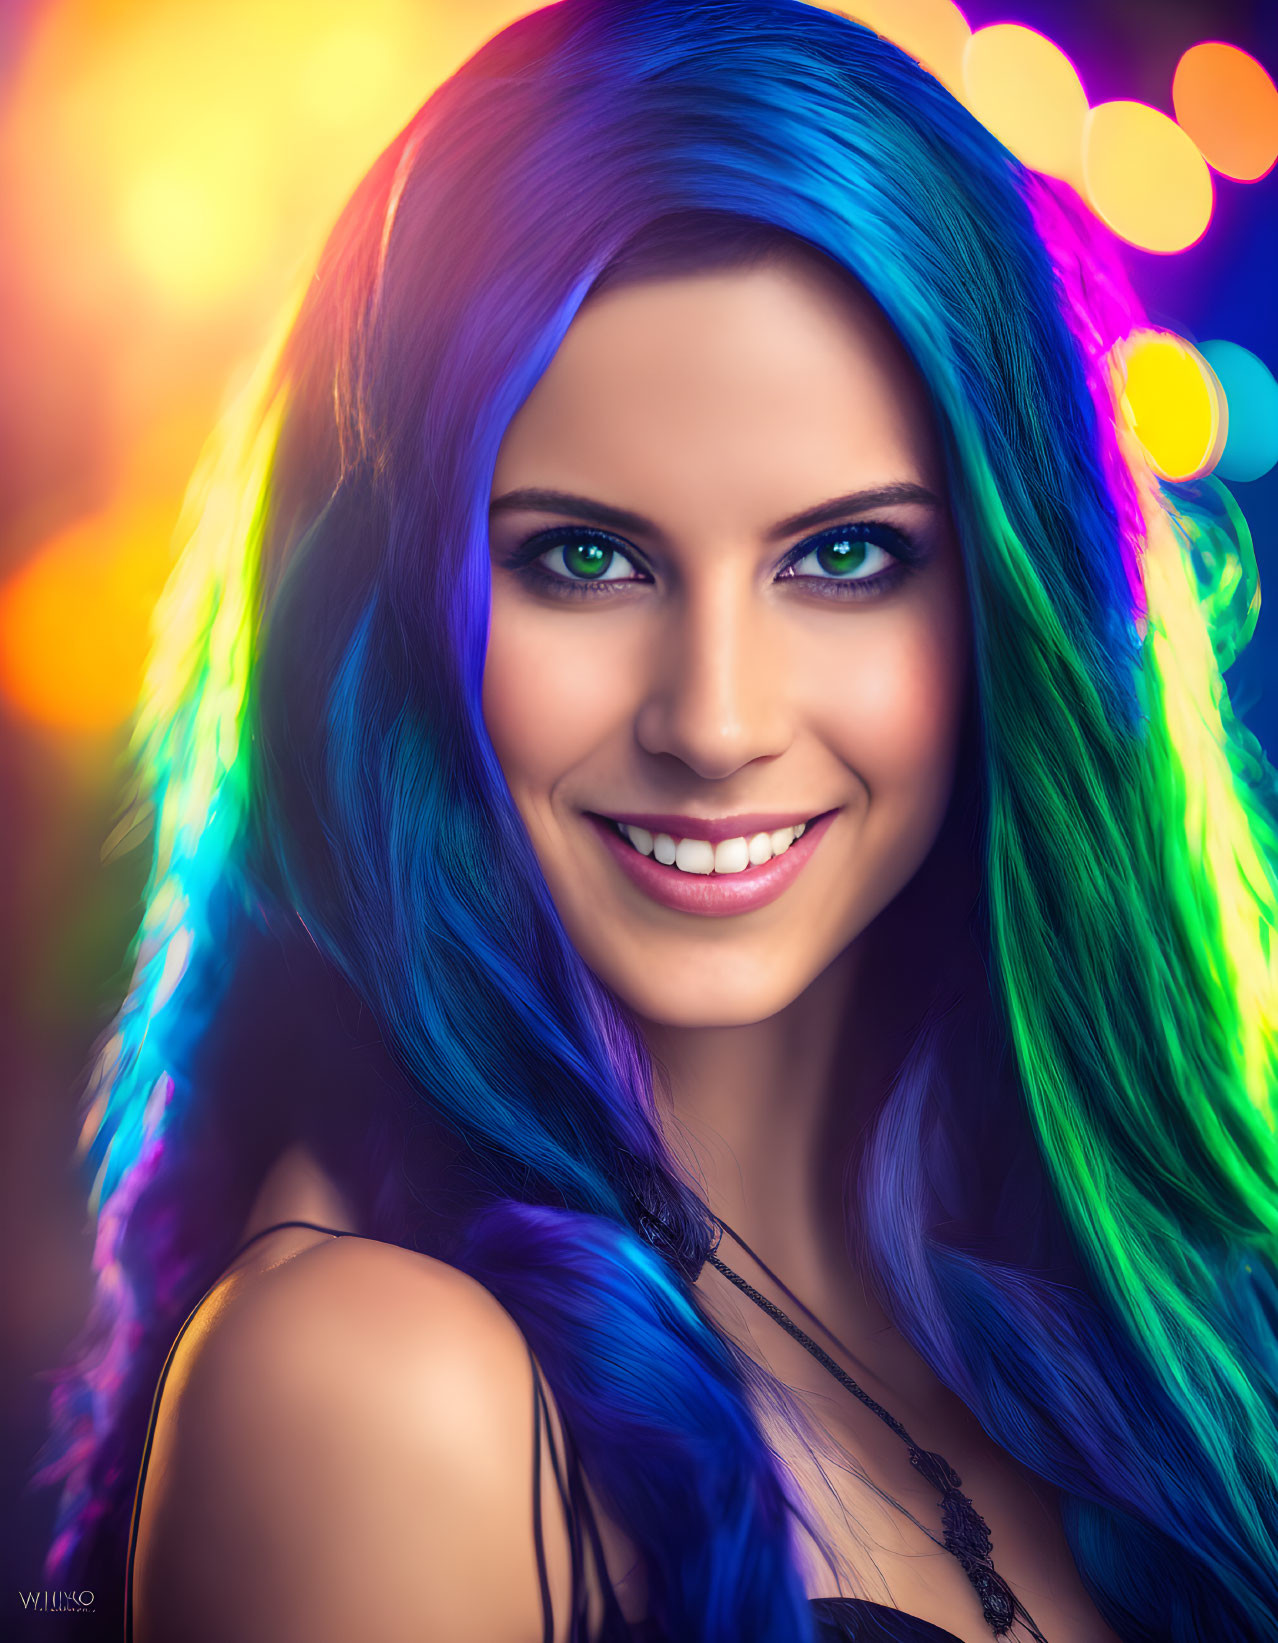 Beautiful Lady With Colorful Hair And Green Eyes